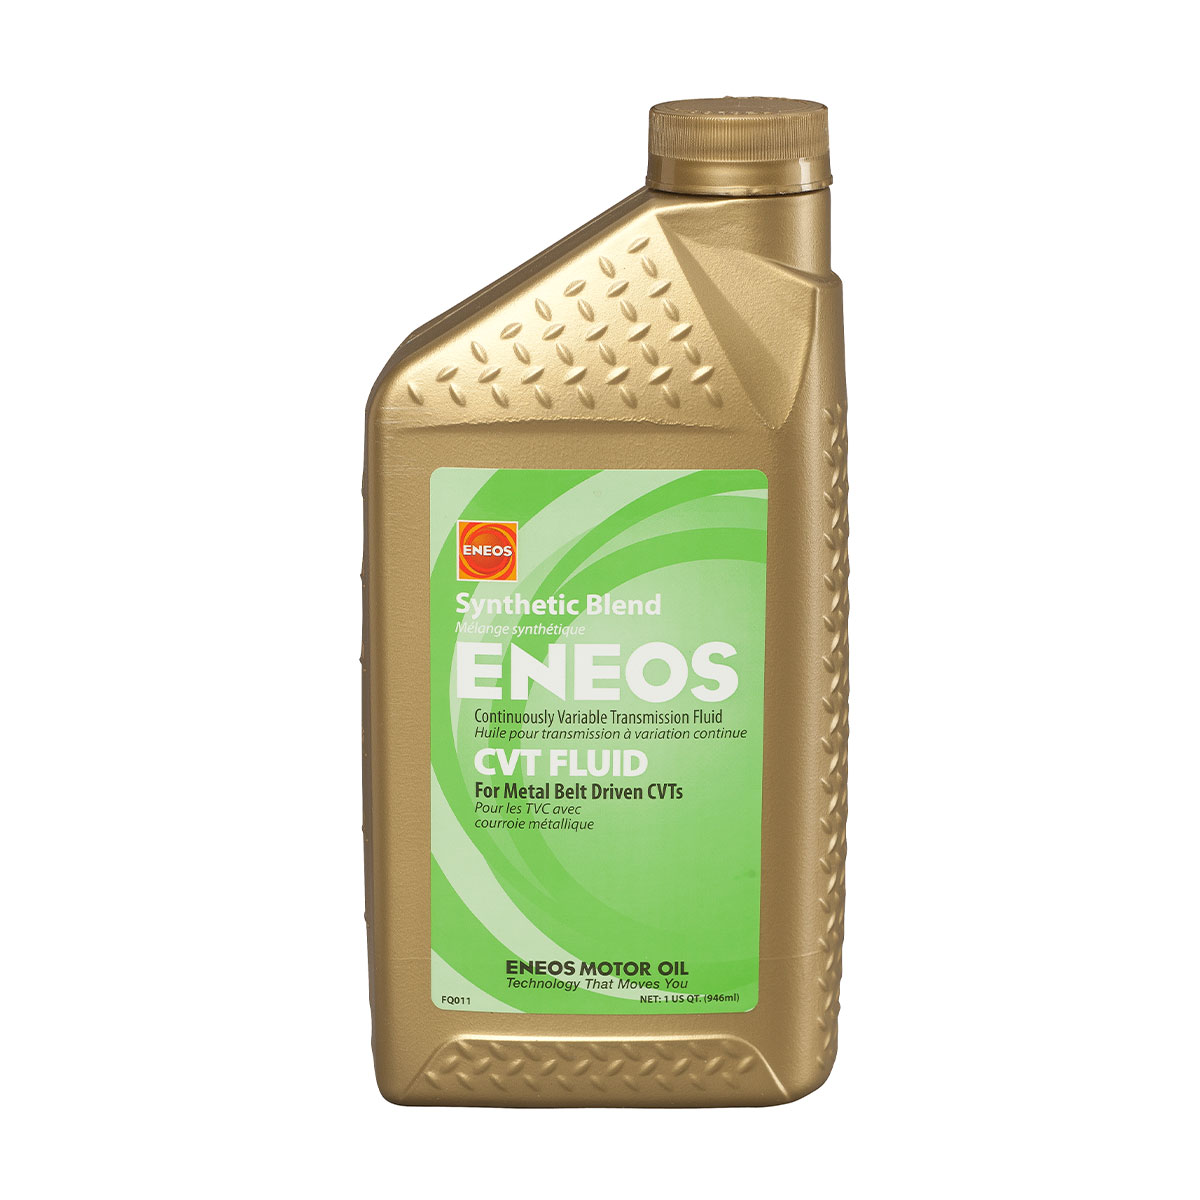 ENEOS CVT Fluid for Continually Variable Transmissions